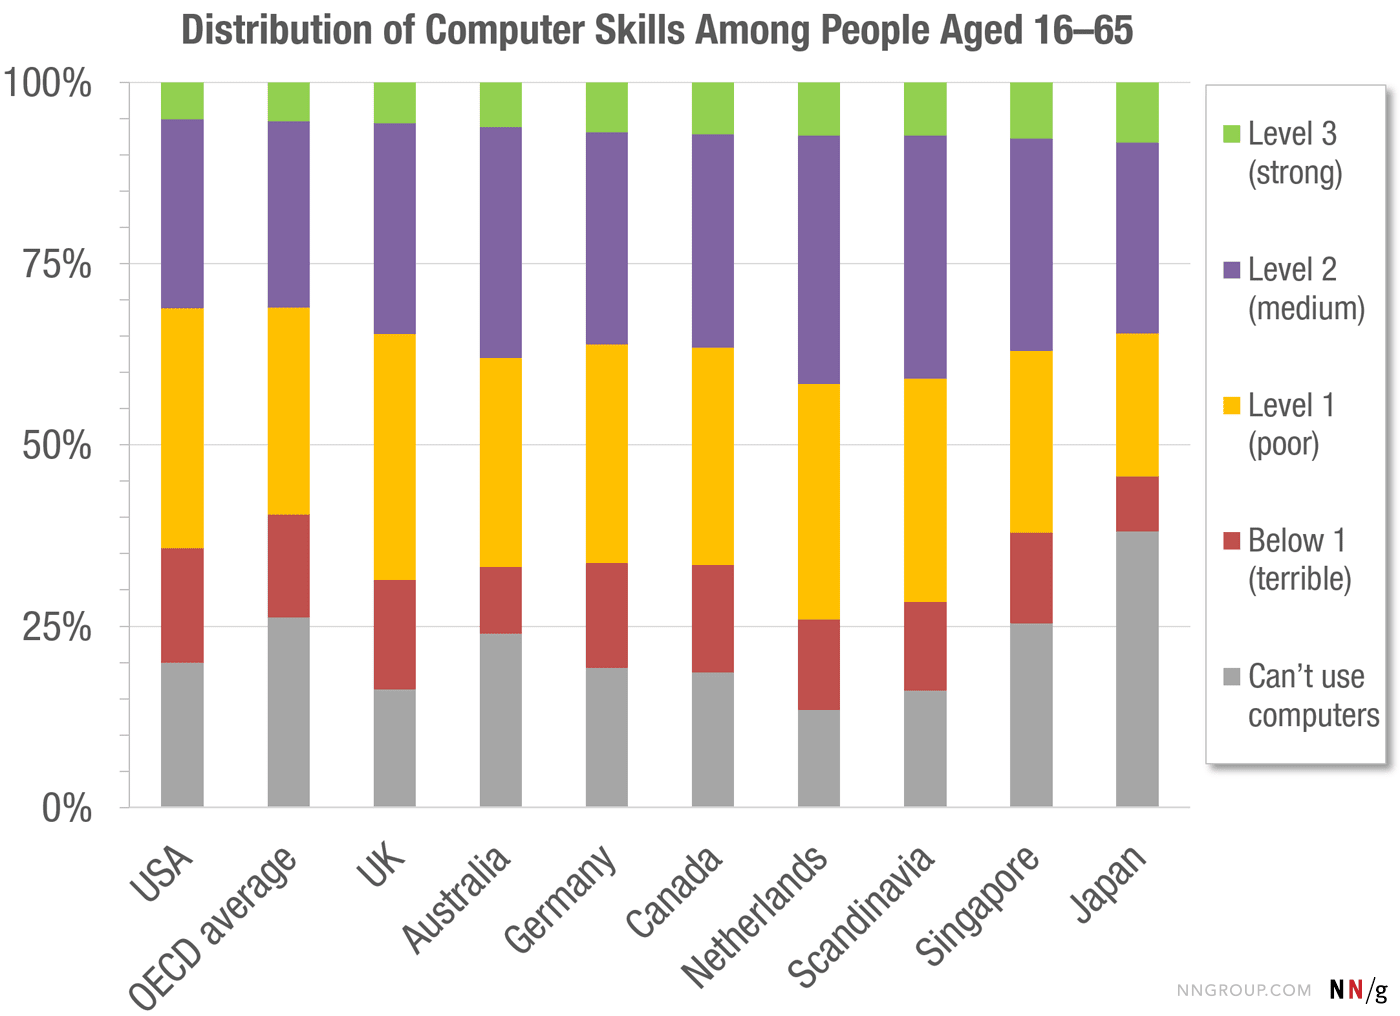 Data from the OECD study of technical skills show the distribution among skill levels across countries as well as the average for all OECD countries.